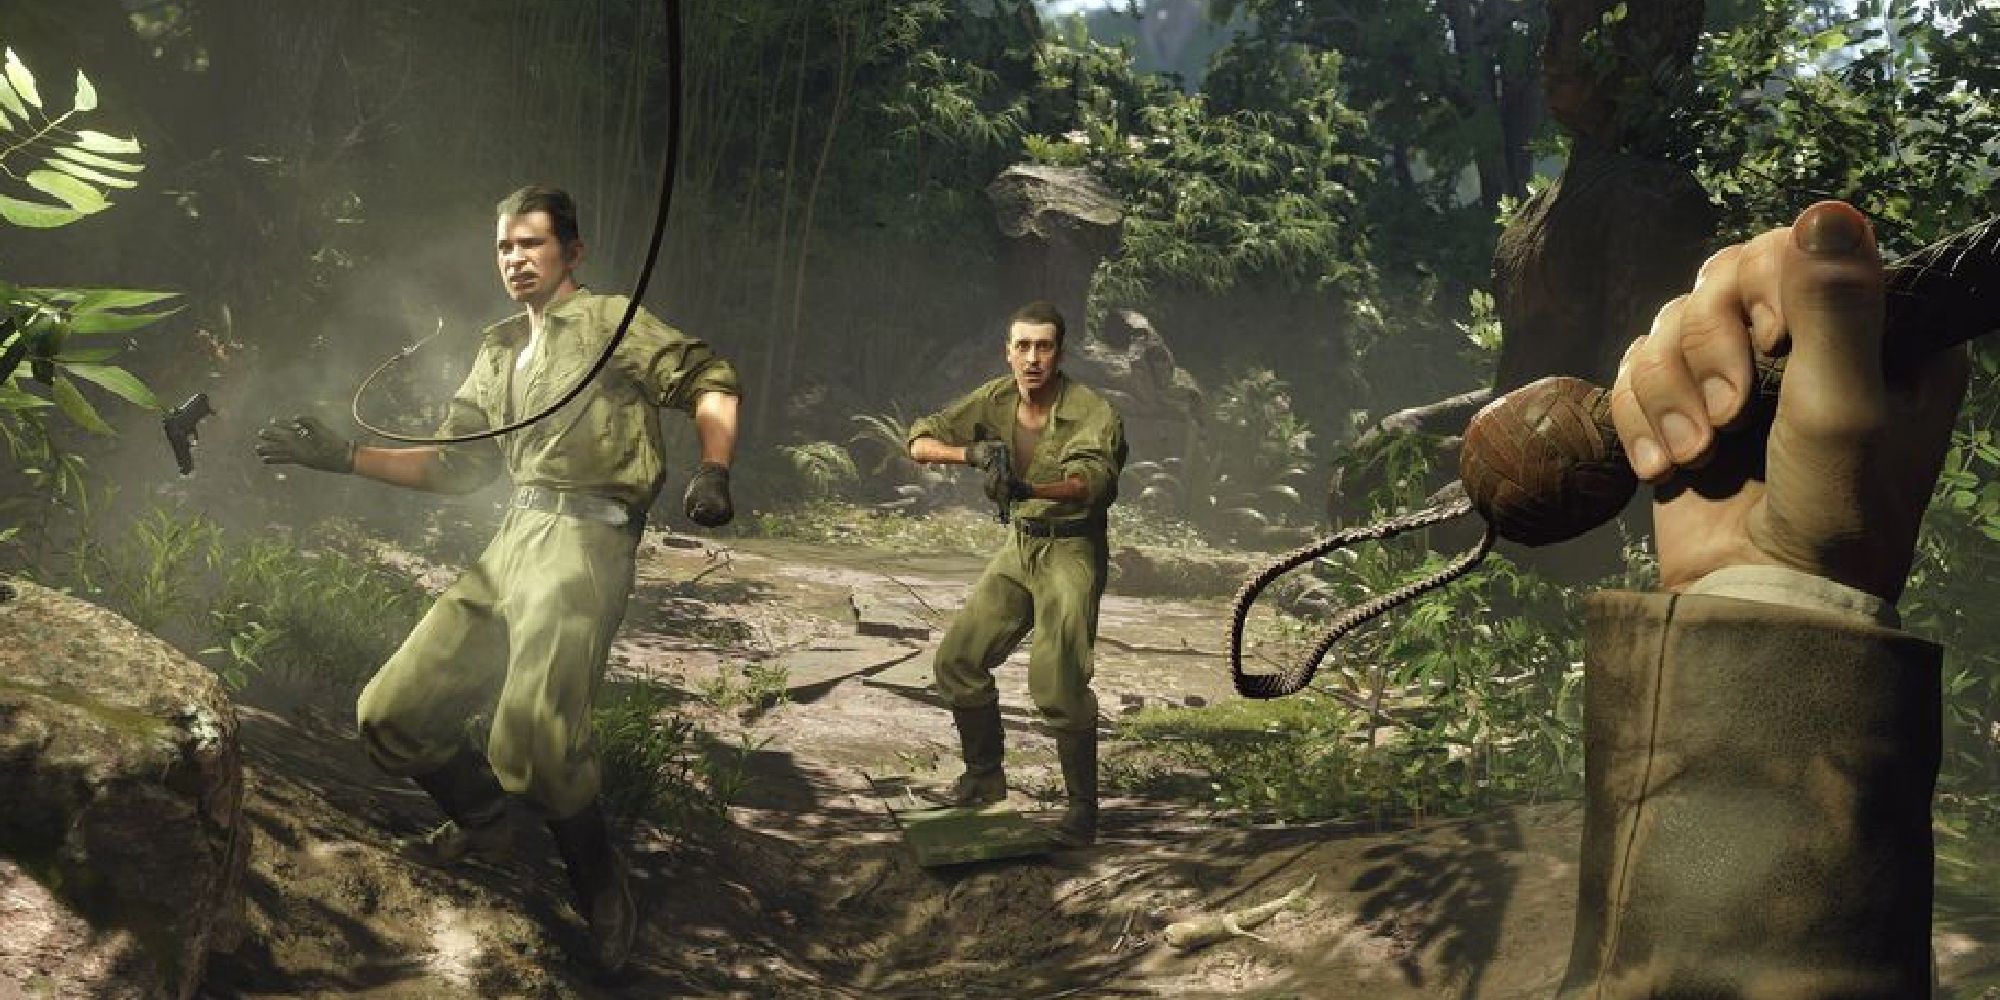 Indiana Jones gameplay showing him using his whip in first-person to disarm a guard, knocking their pistol out of their hand while another guard watches